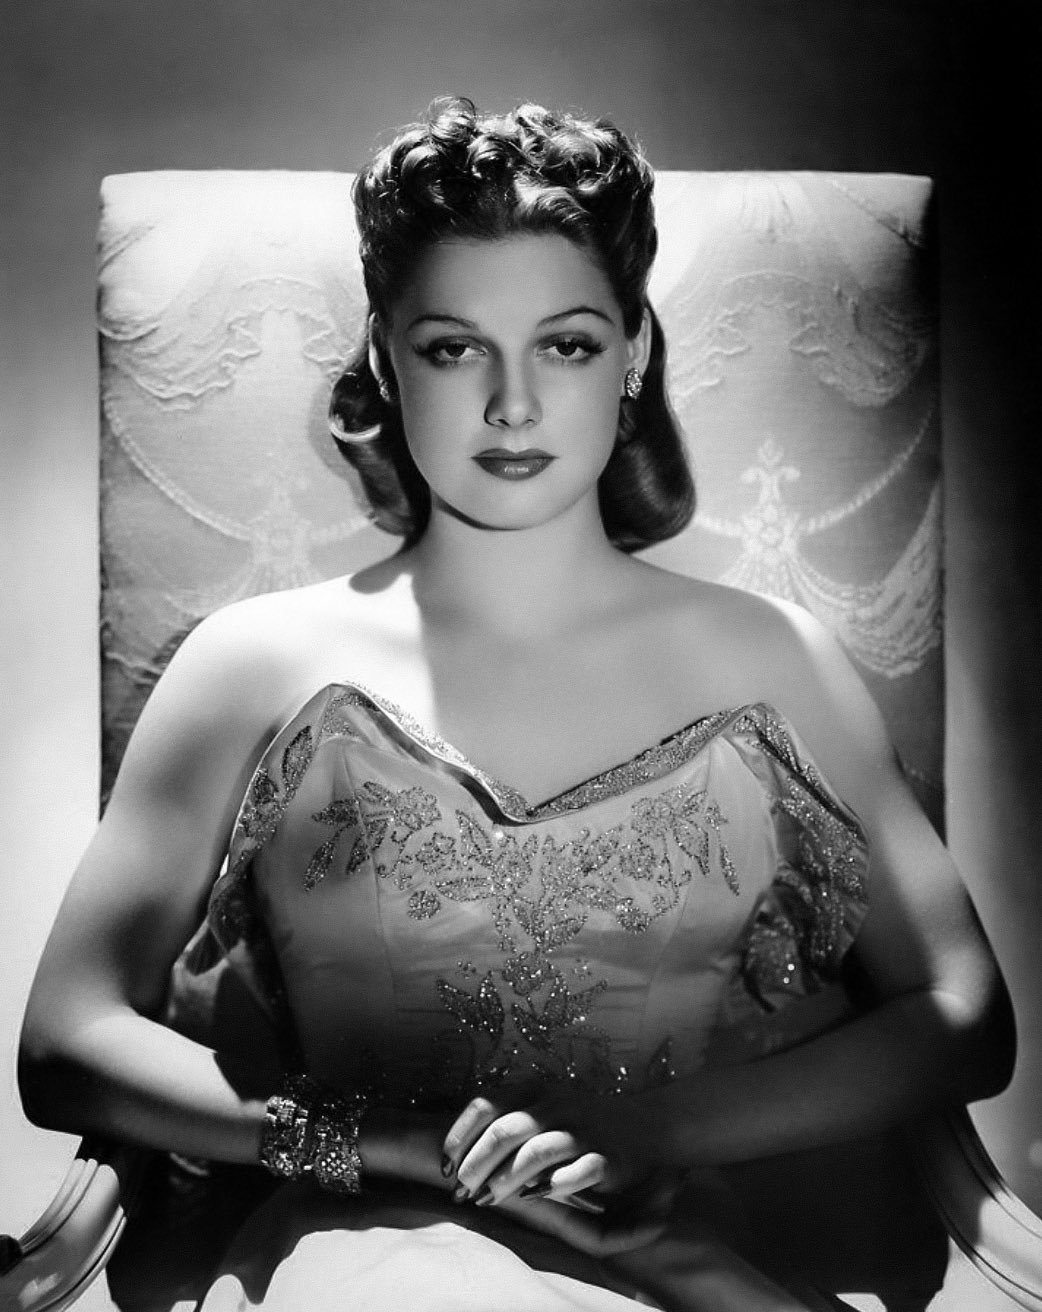 Ann Sheridan photographed by George Hurrell, 1942.